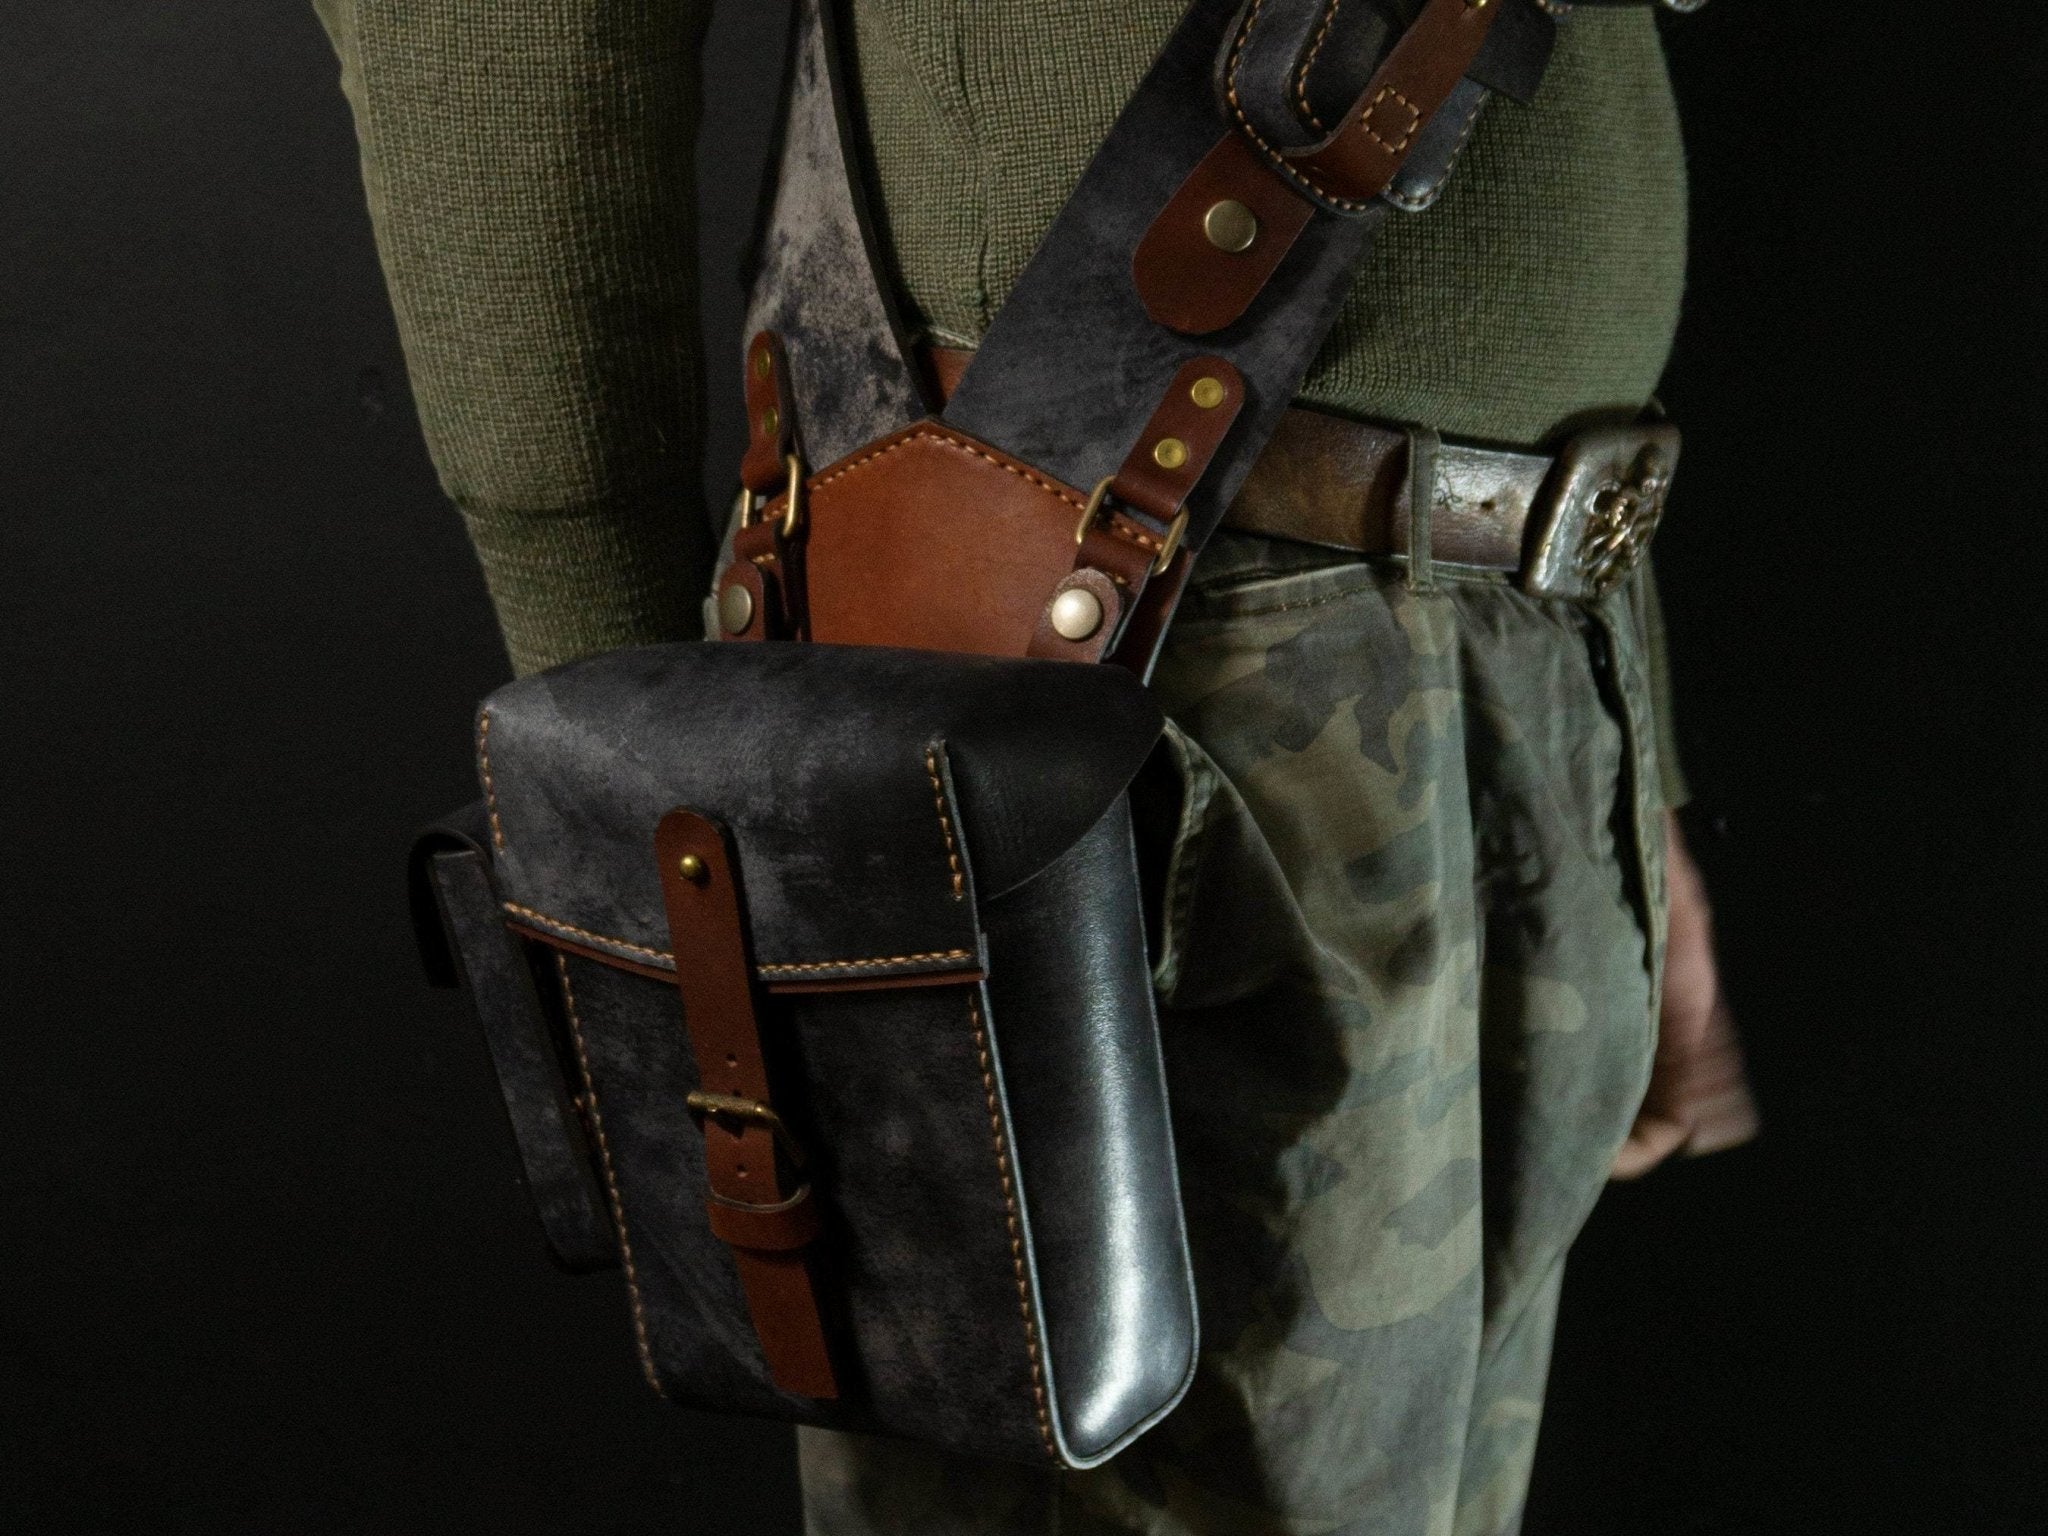 New Arrival Steampunk Leather Suspender Holster Bag Double Harness